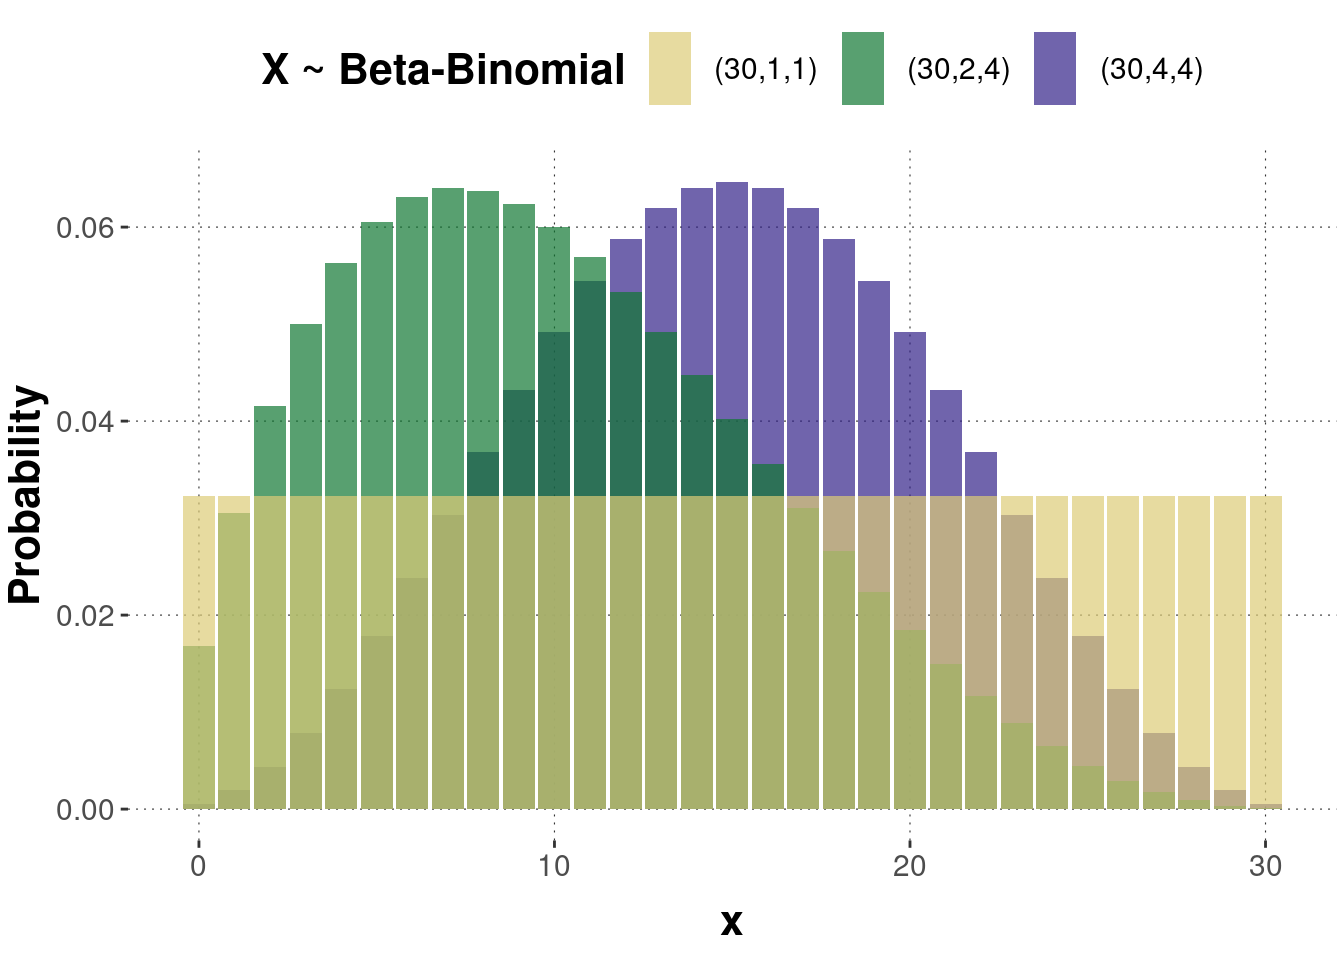 Examples of a probability mass function of the beta-binomial distribution. Triples of numbers in the legend represent parameter values $(n,a,b)$.